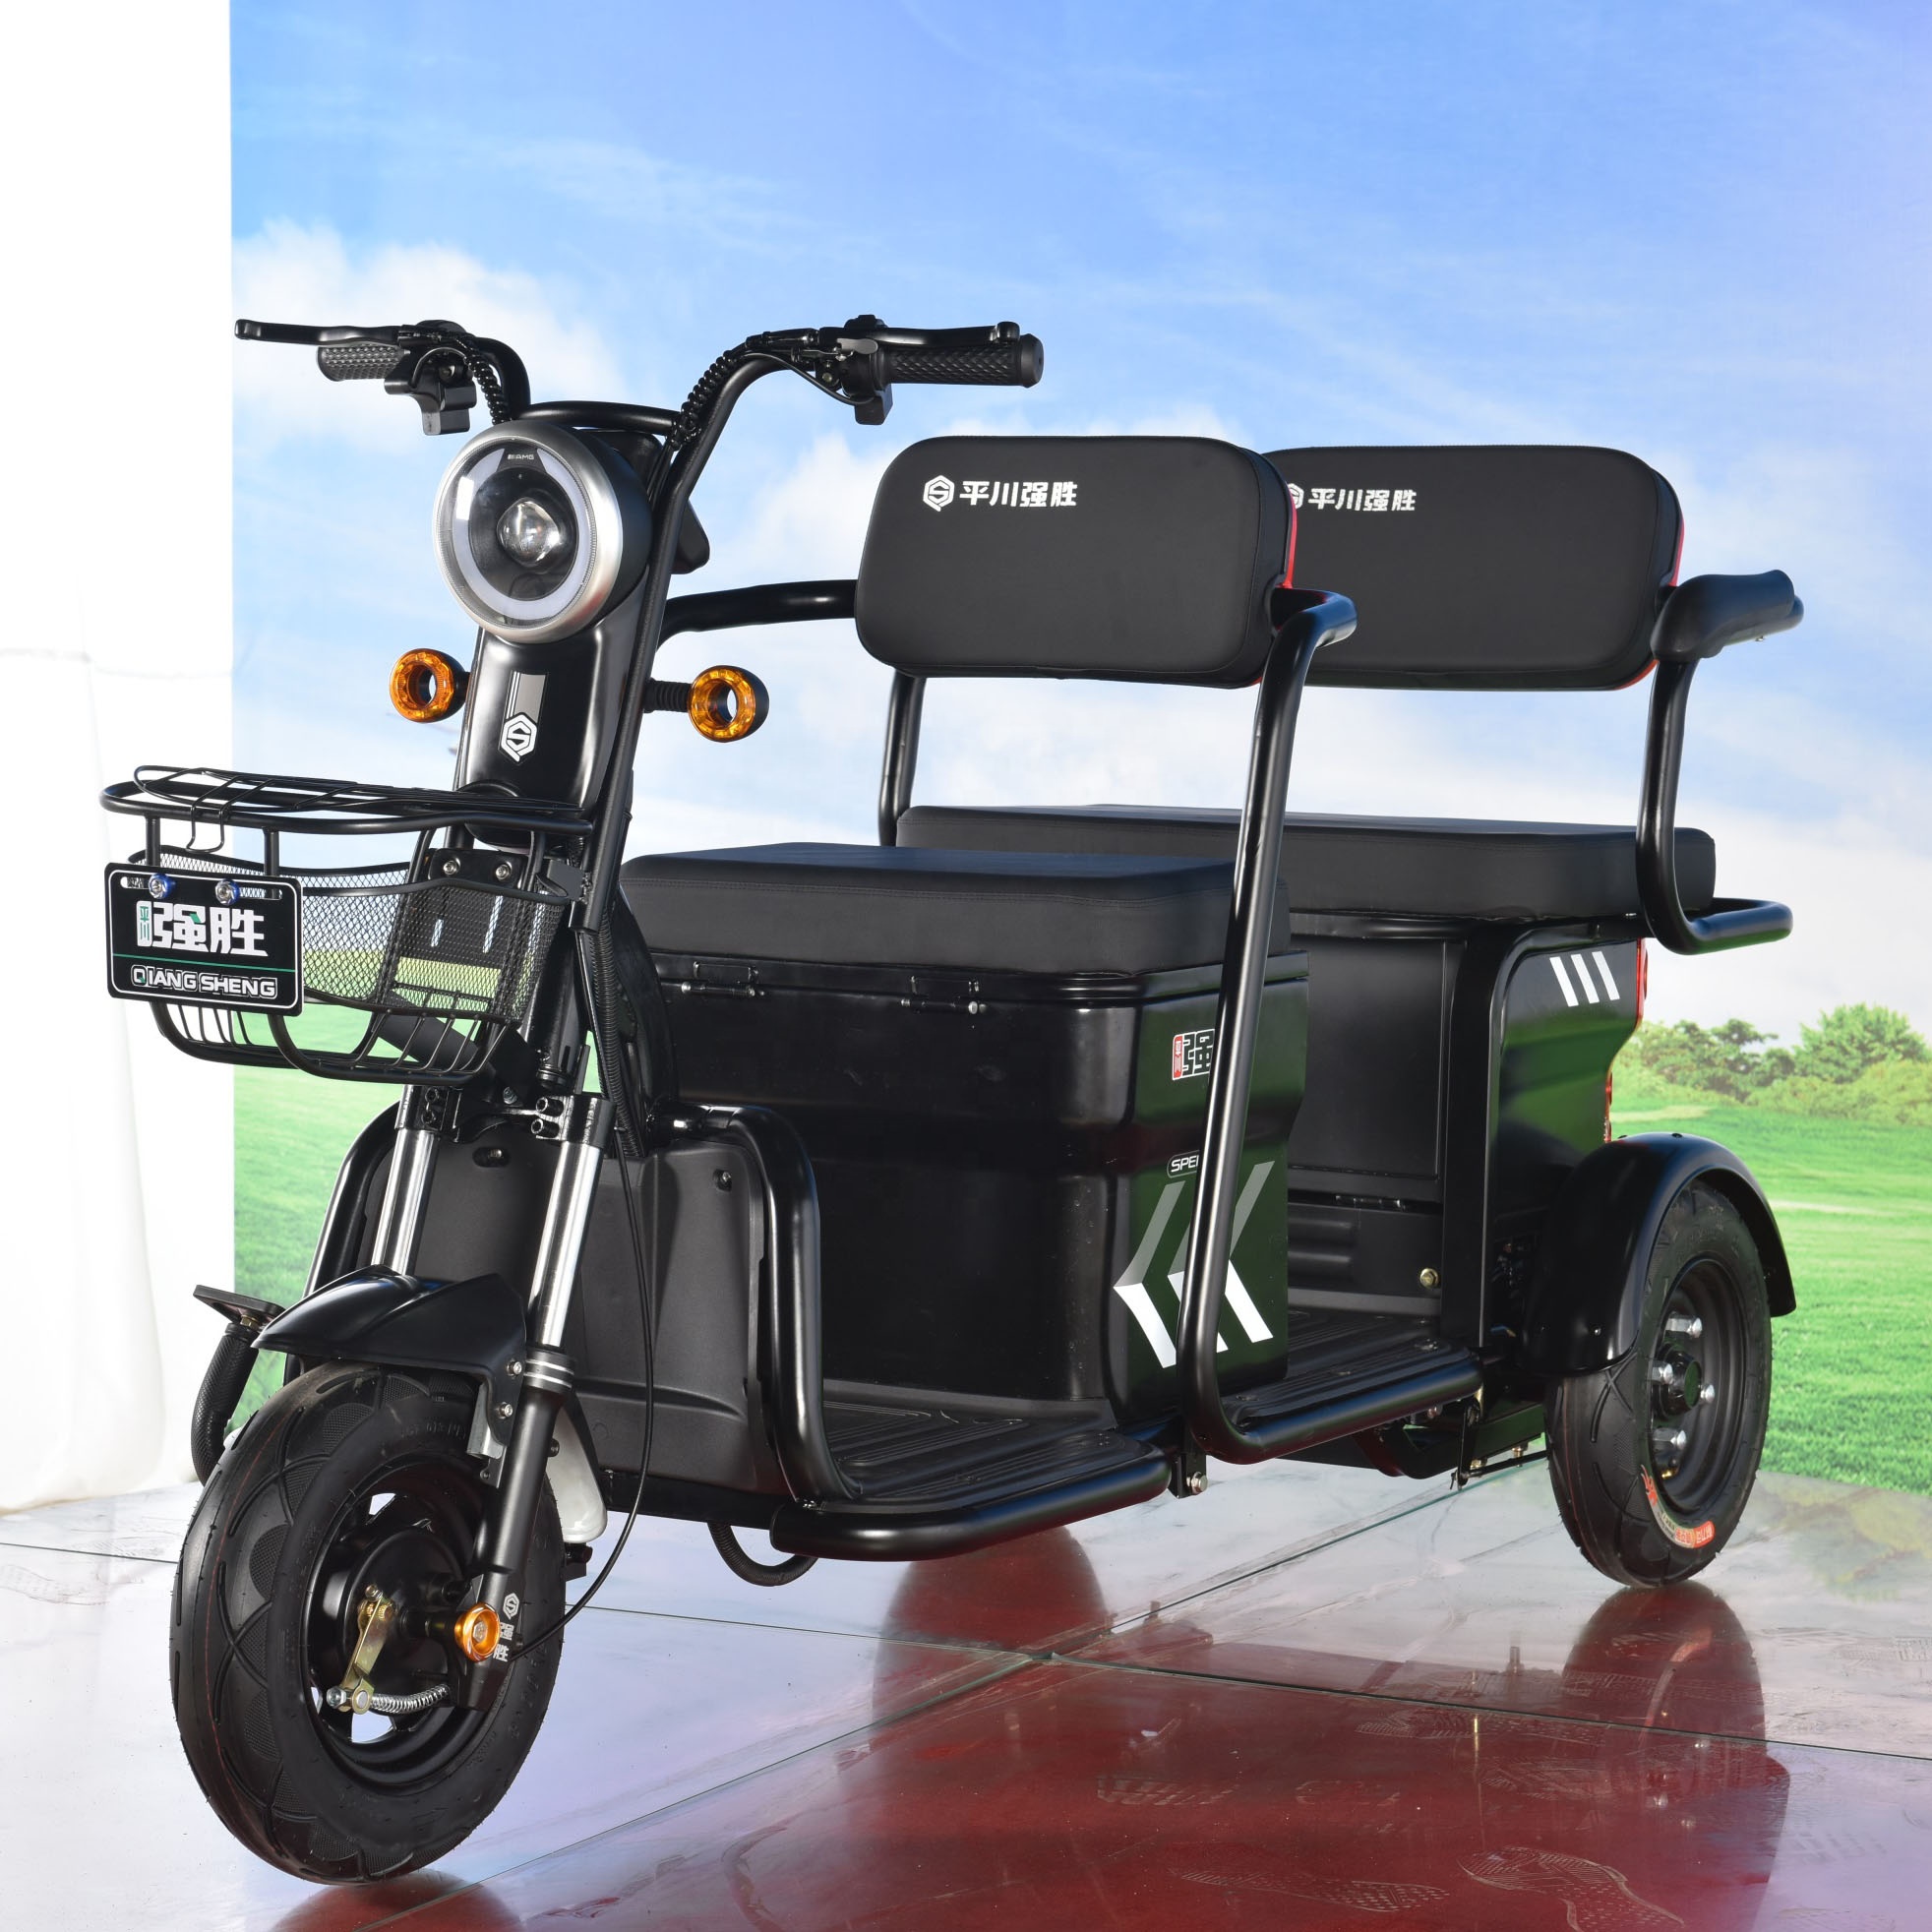 China Wholesale Toto Rickshaw Specifications Quotes - 2021 hot sale Green eco friendly tricycle city bus e trike – Qiangsheng